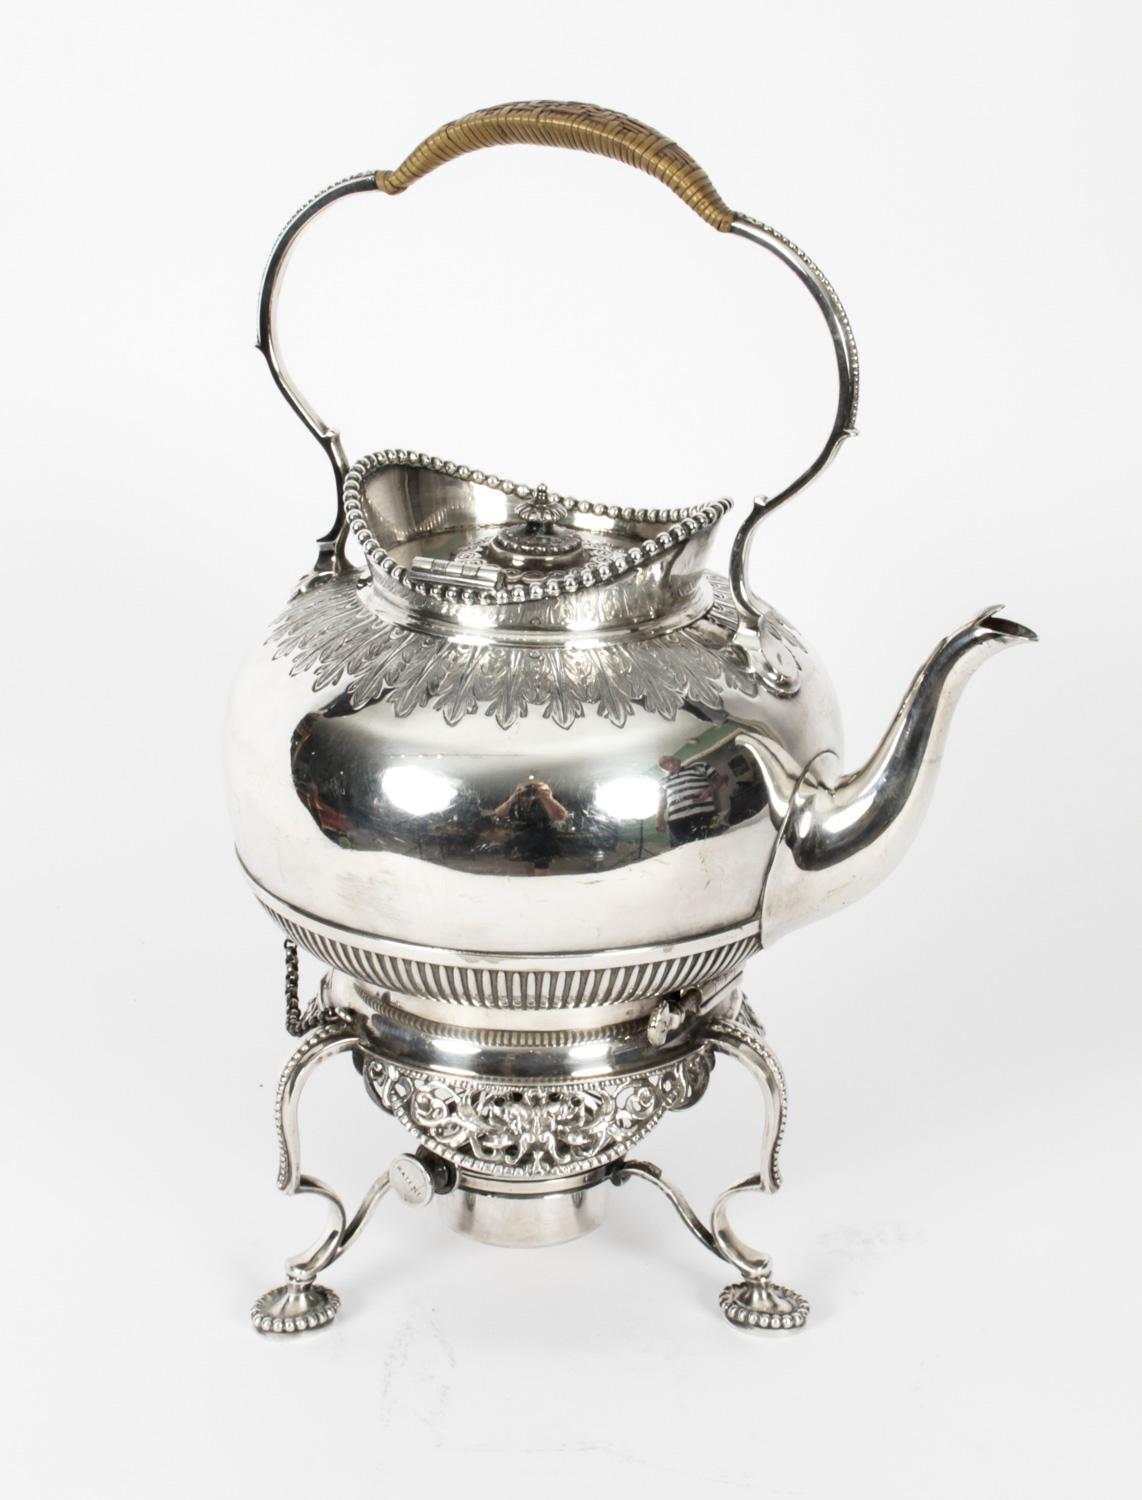 Antique Silver Plate Spirit Kettle on Stand by Elkington Dated 1845 19th C 10